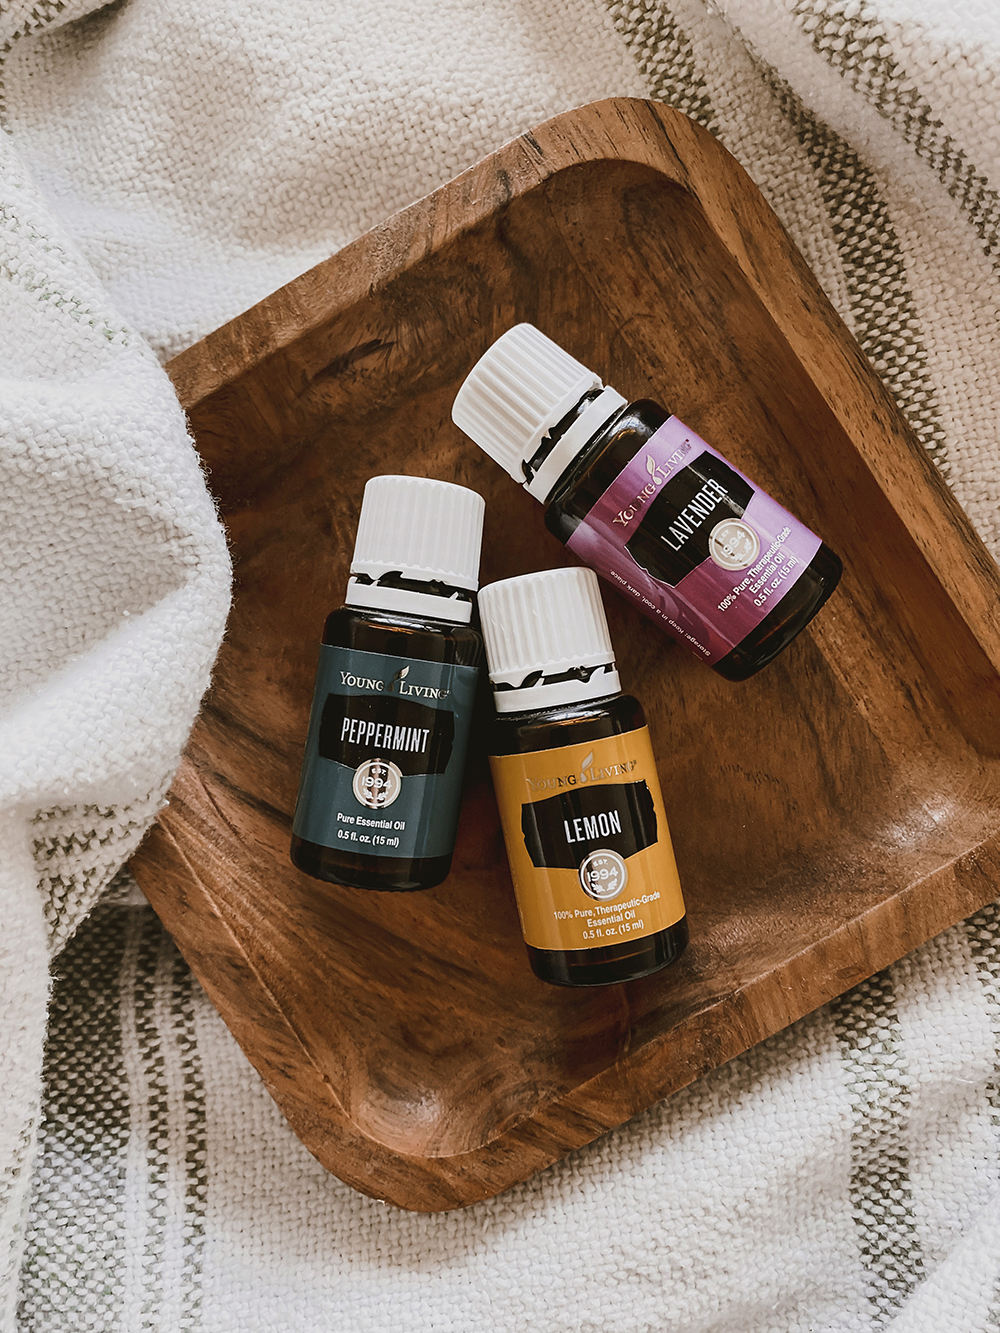 This time of year can be brutal for allergy sufferers. We have a few in our home so I wanted to share what I have learned and experience in seasonal allergy support using essential oils. Three specific oils to be exact. Catch it all over on KaraLayne.com for Wellness Wednesday!